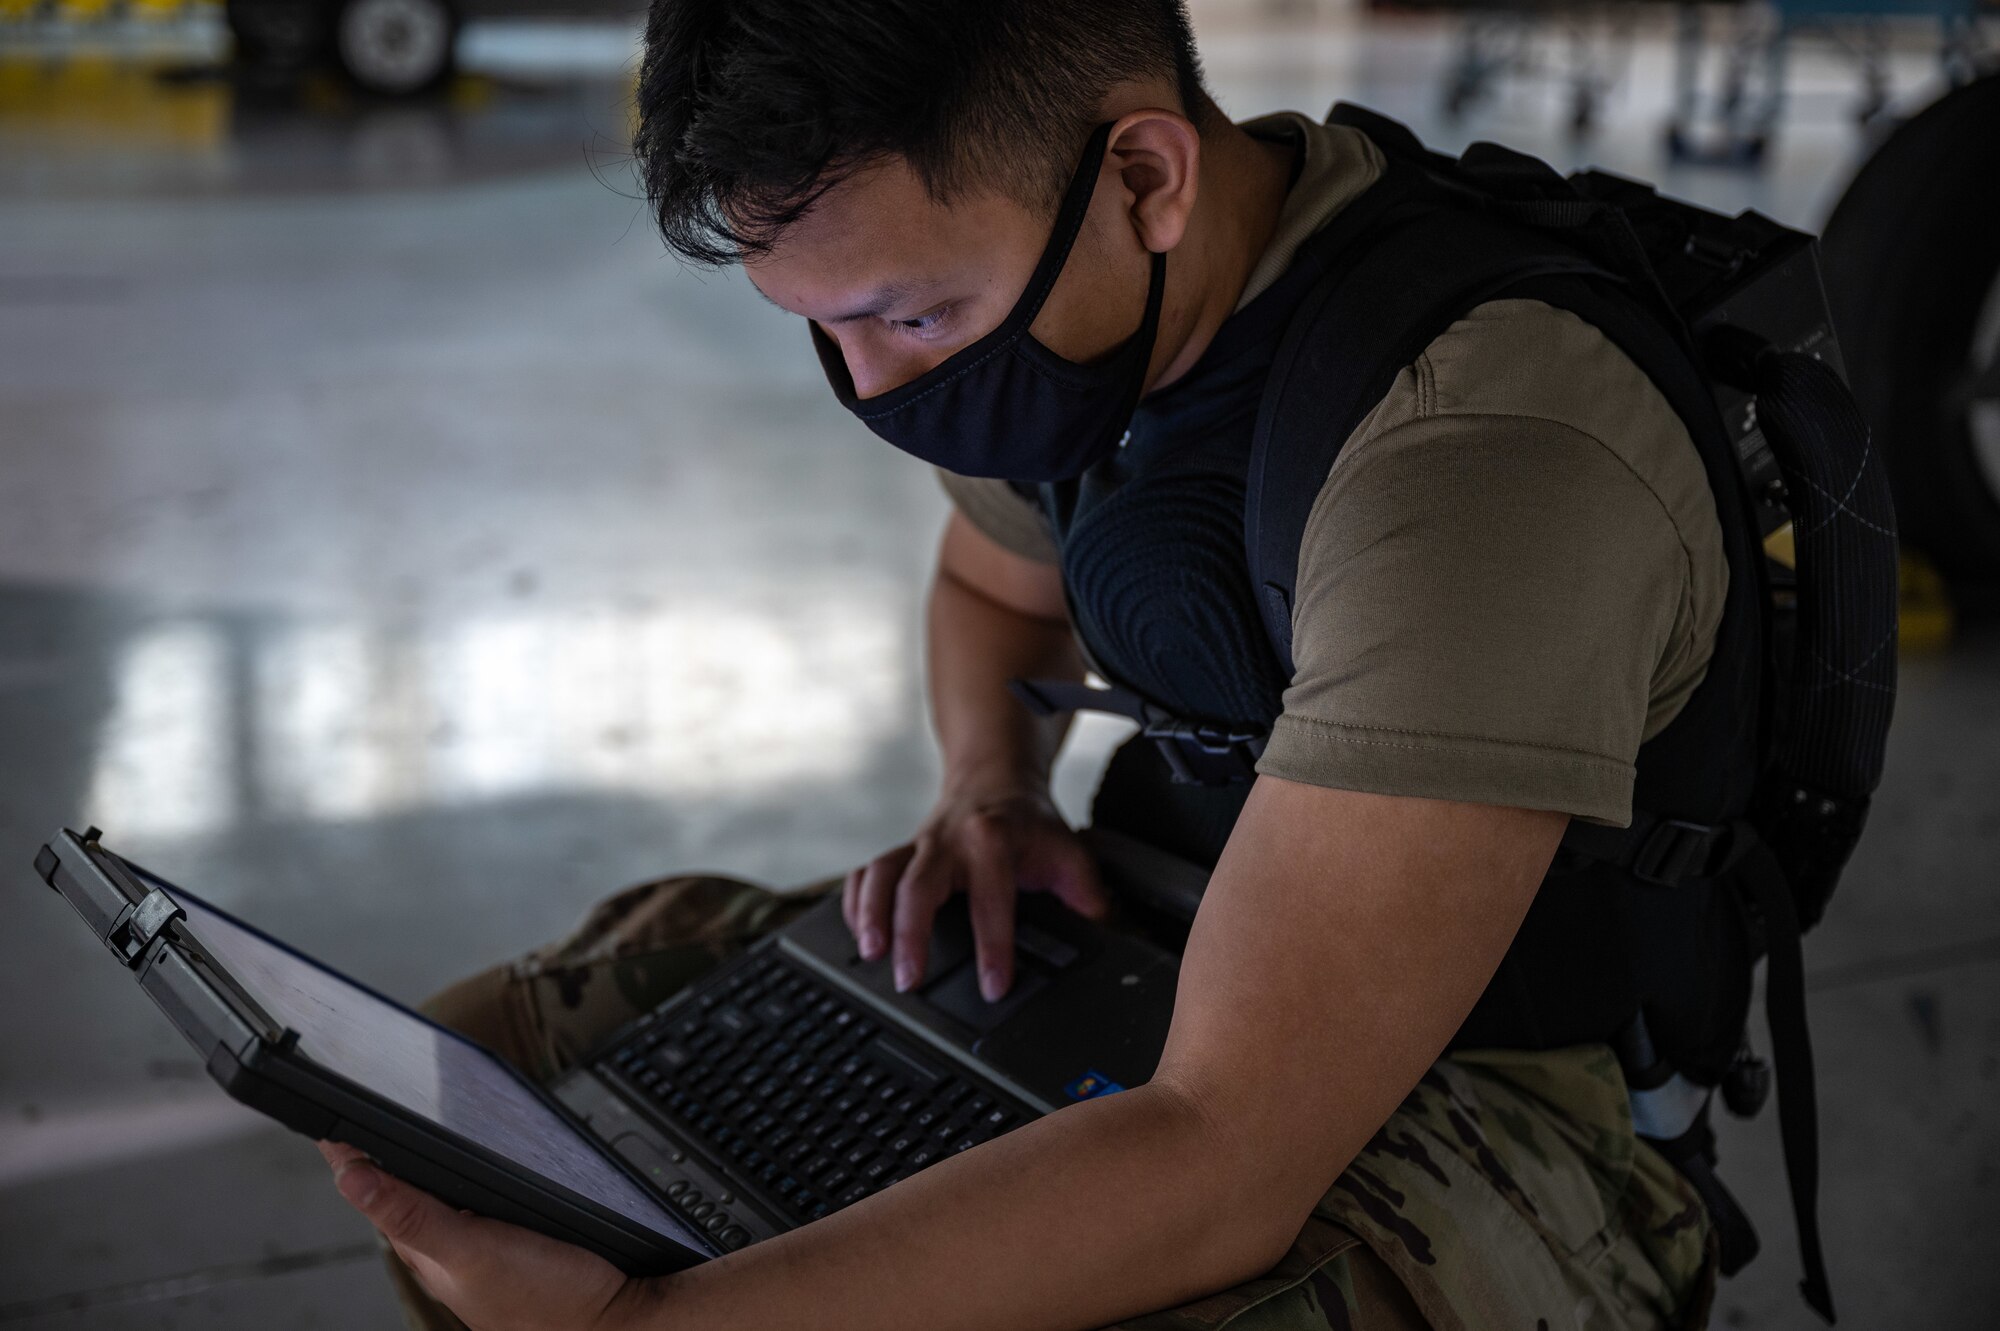 An Airman works on a laptop while under an F-22 Raptor.